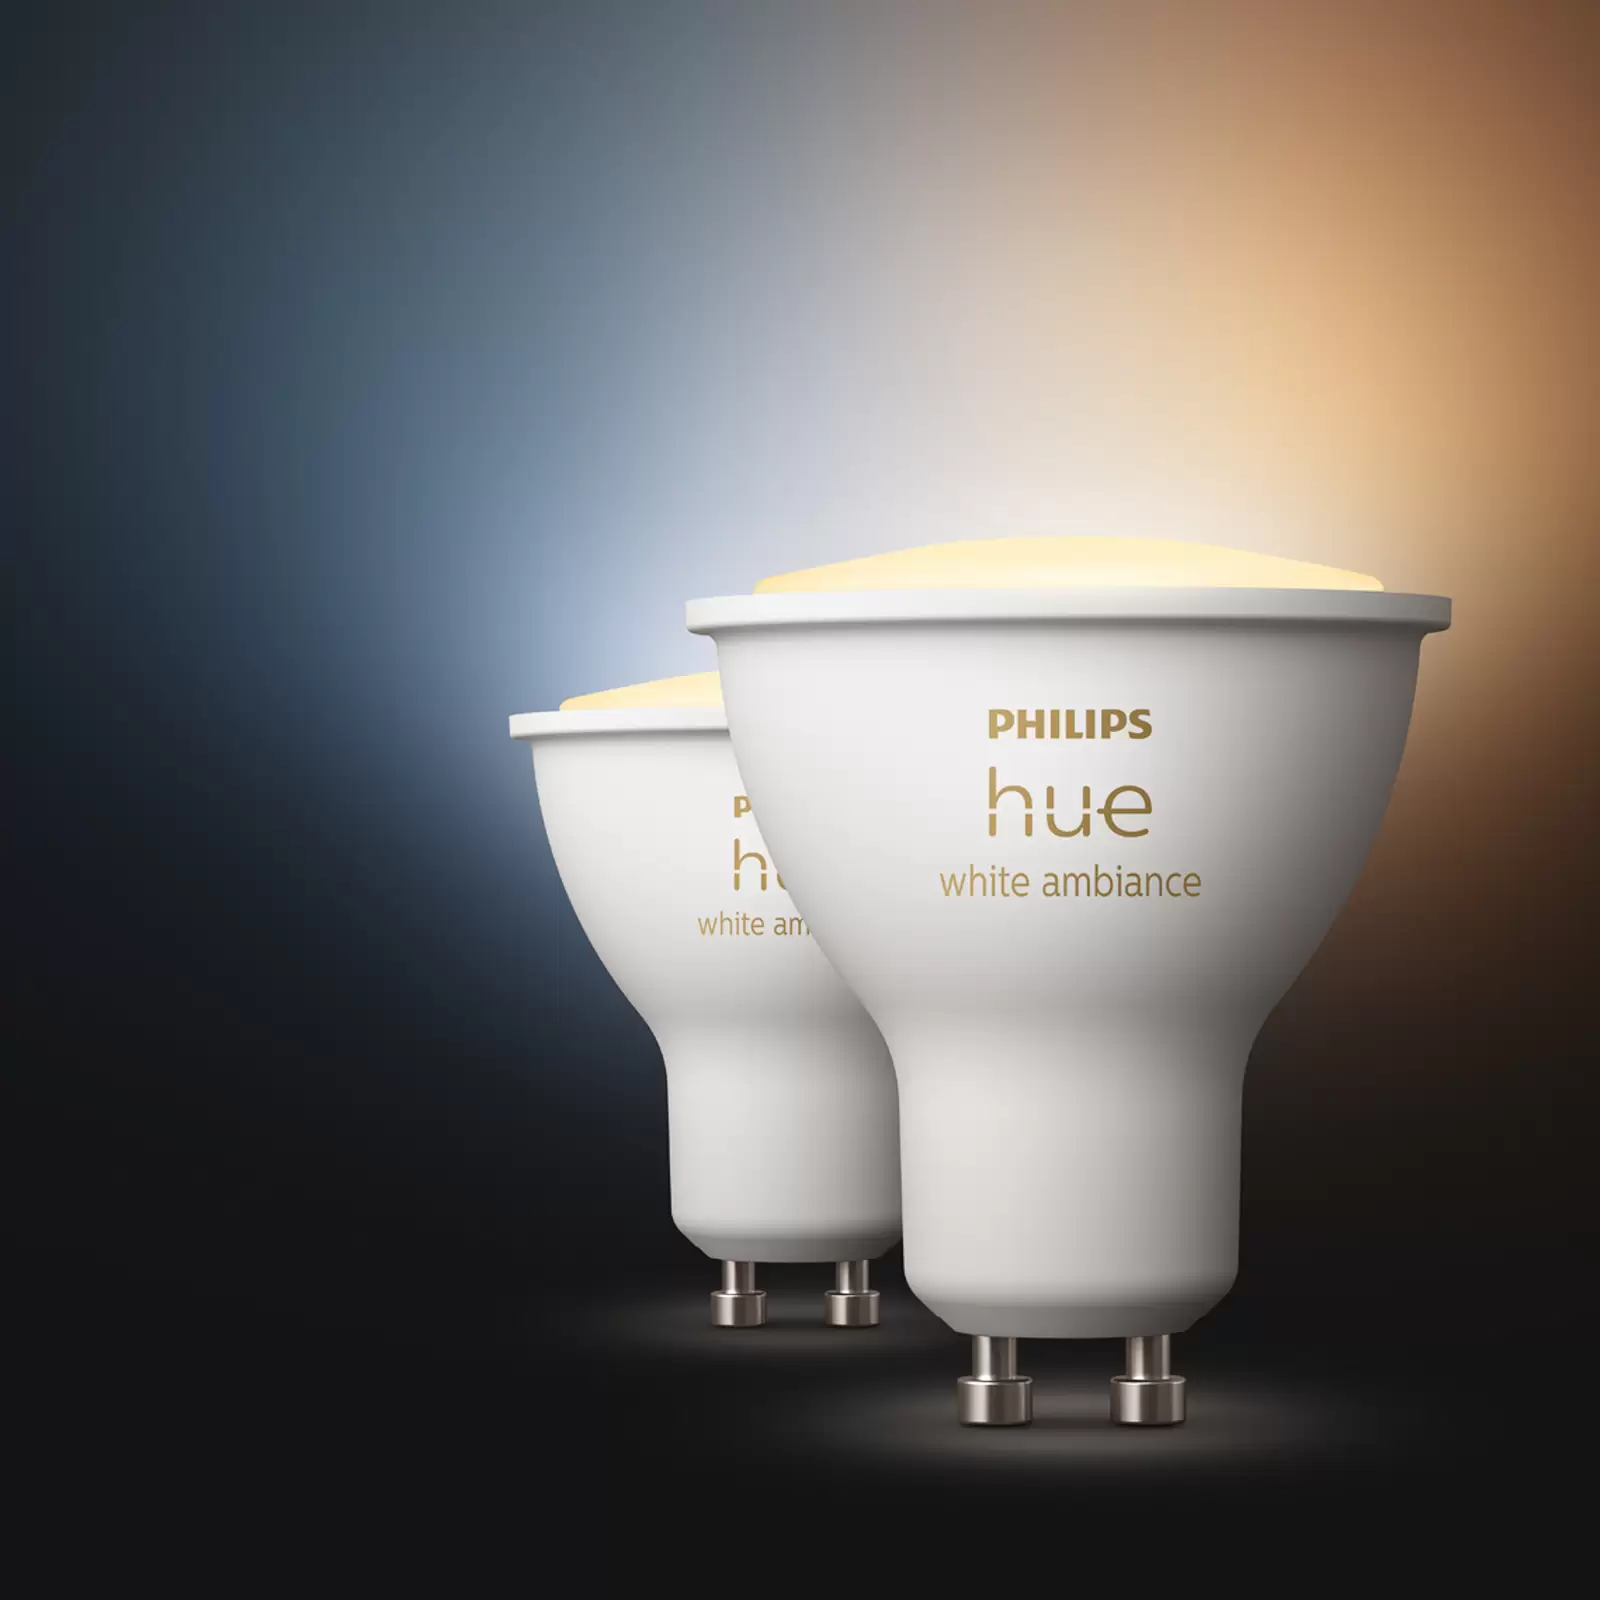 Buy Philips Hue Bulbs 3x GU10 (LED) 4.3W 350lm White and colored light  White